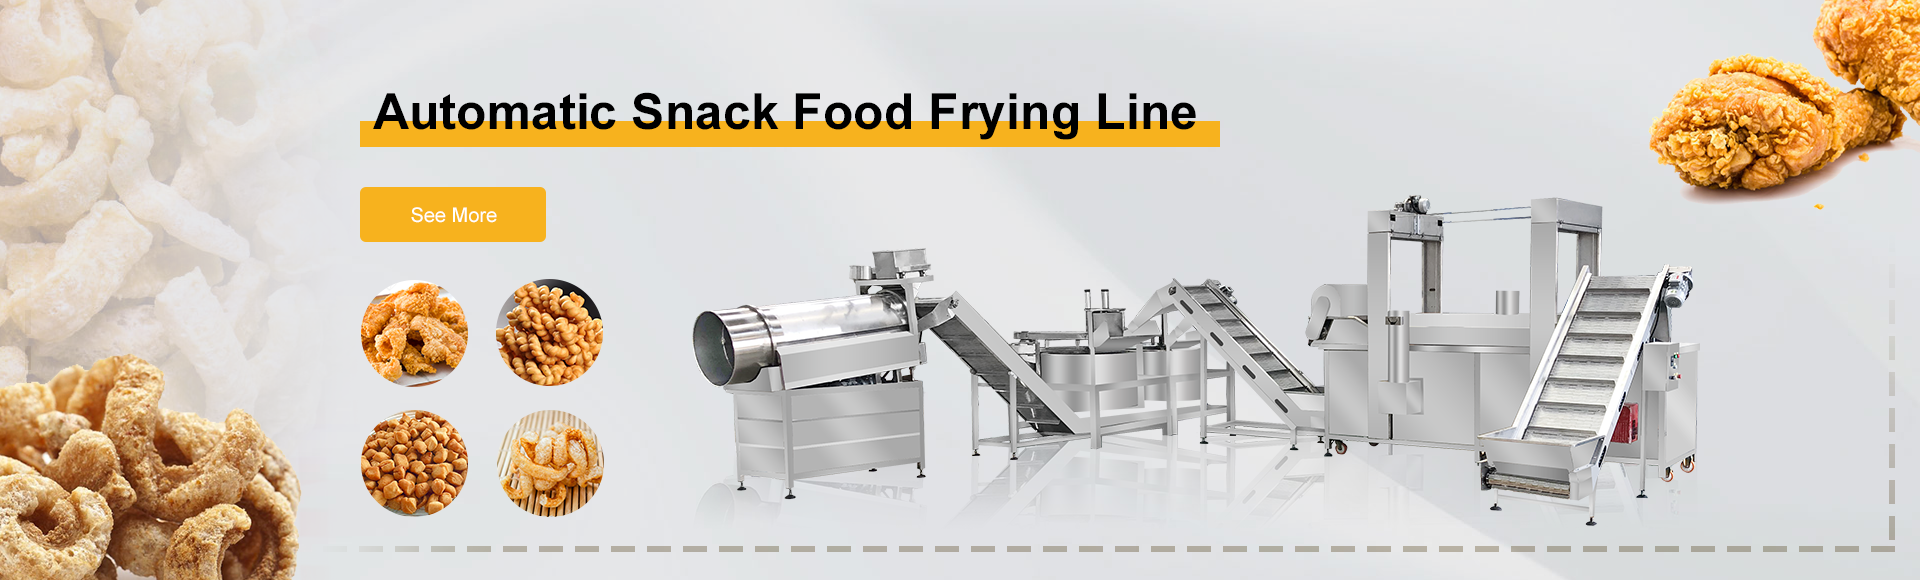 Continuous Snack Food Frying Line